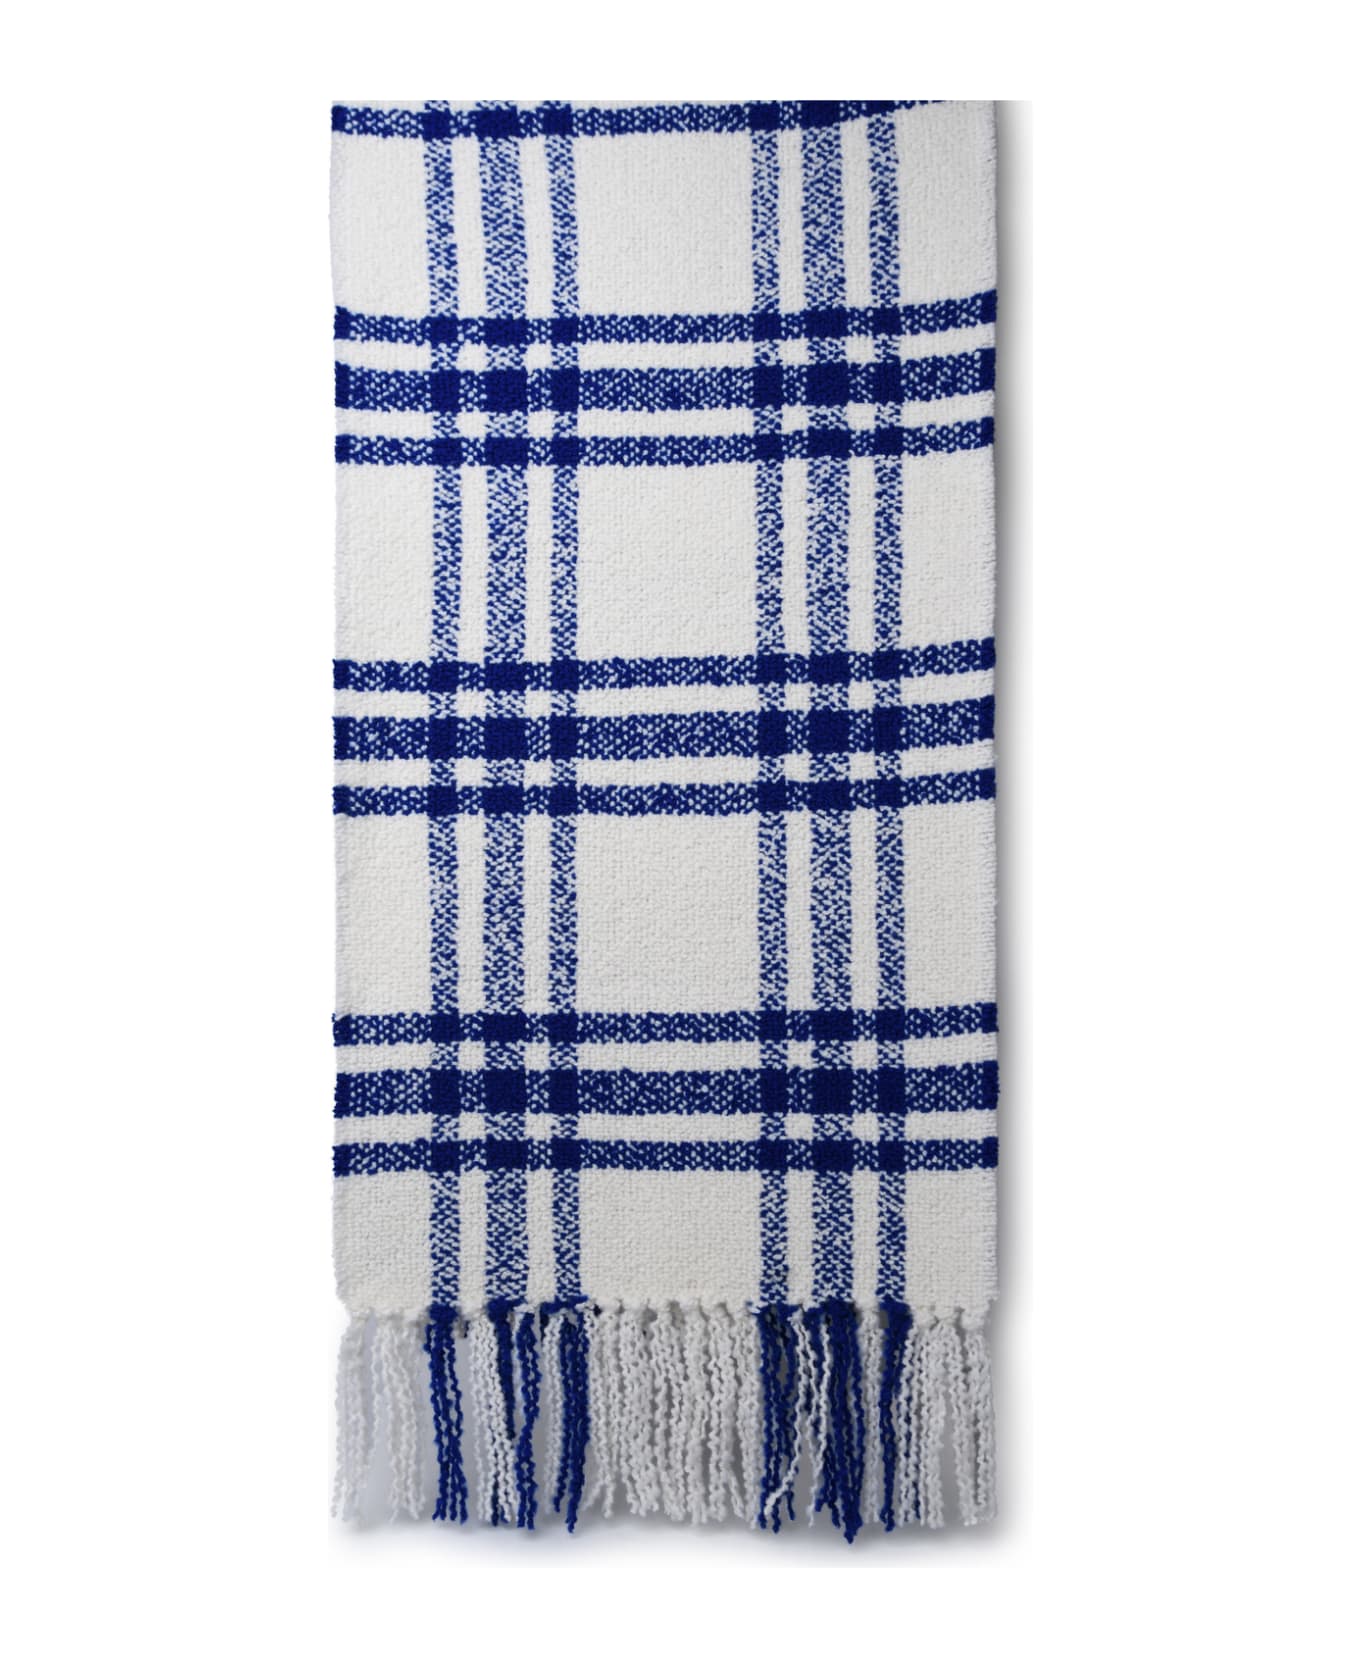 Burberry Brushed Wool Scarf - Blue スカーフ